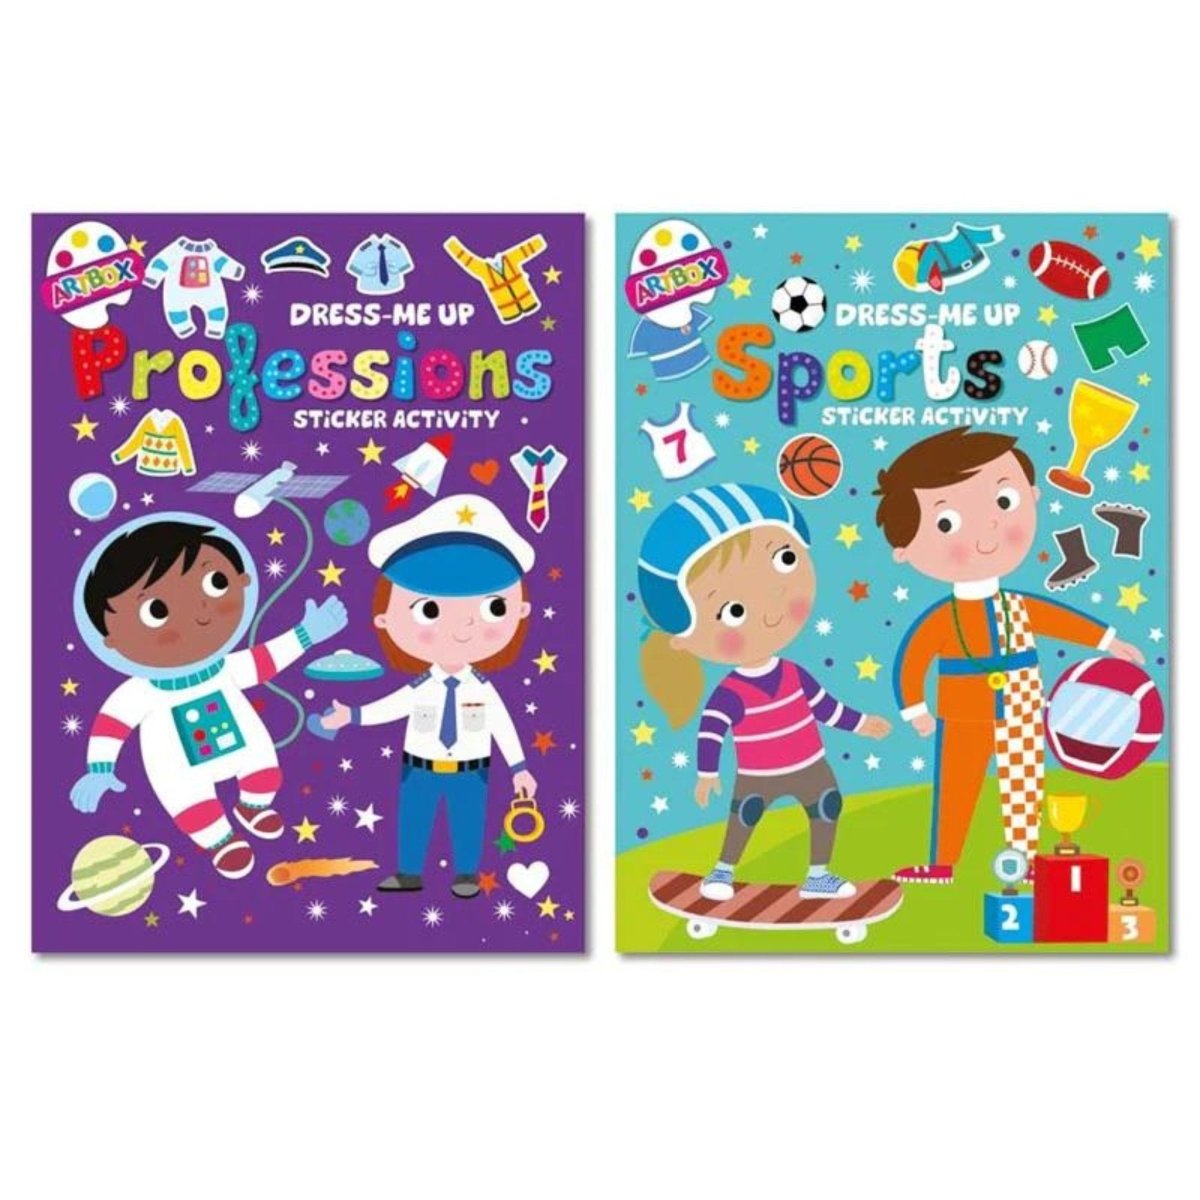 Dress-Me Up Stickers Activity Book - Kids Party Craft